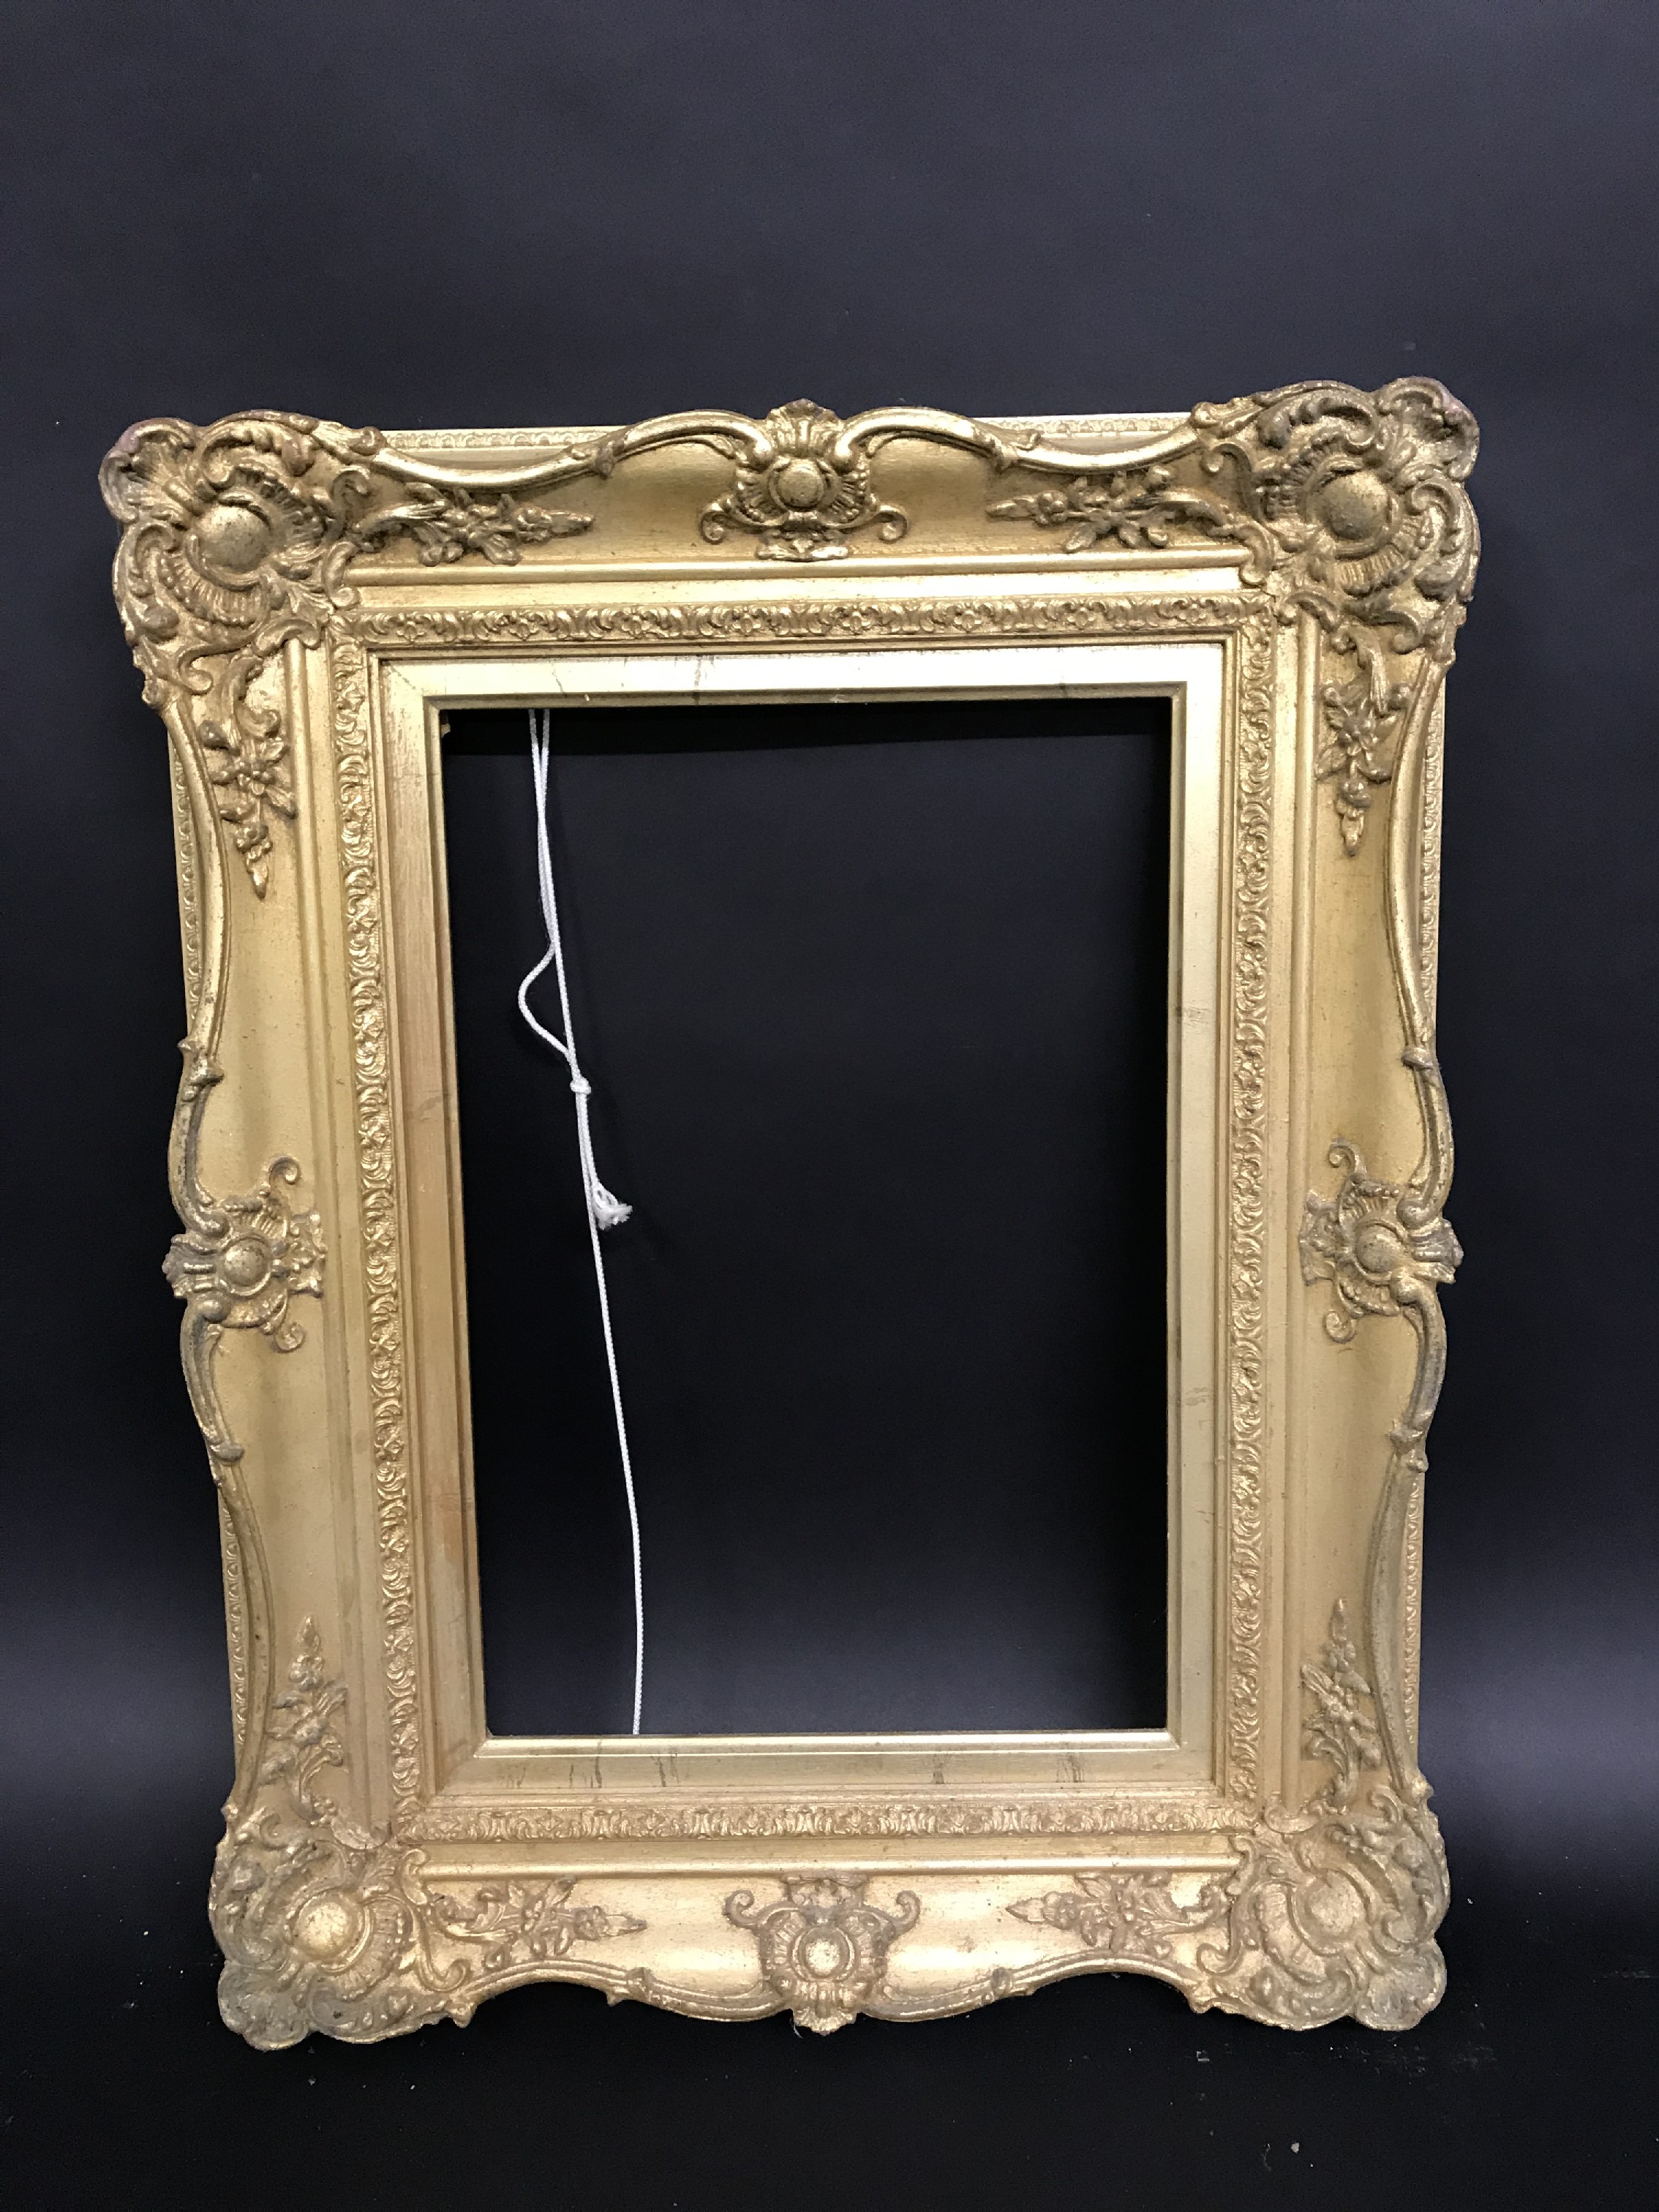 20th Century English School. A Gilt Composition Frame, with Swept Centres and Corners, 16" x 11" ( - Image 2 of 3